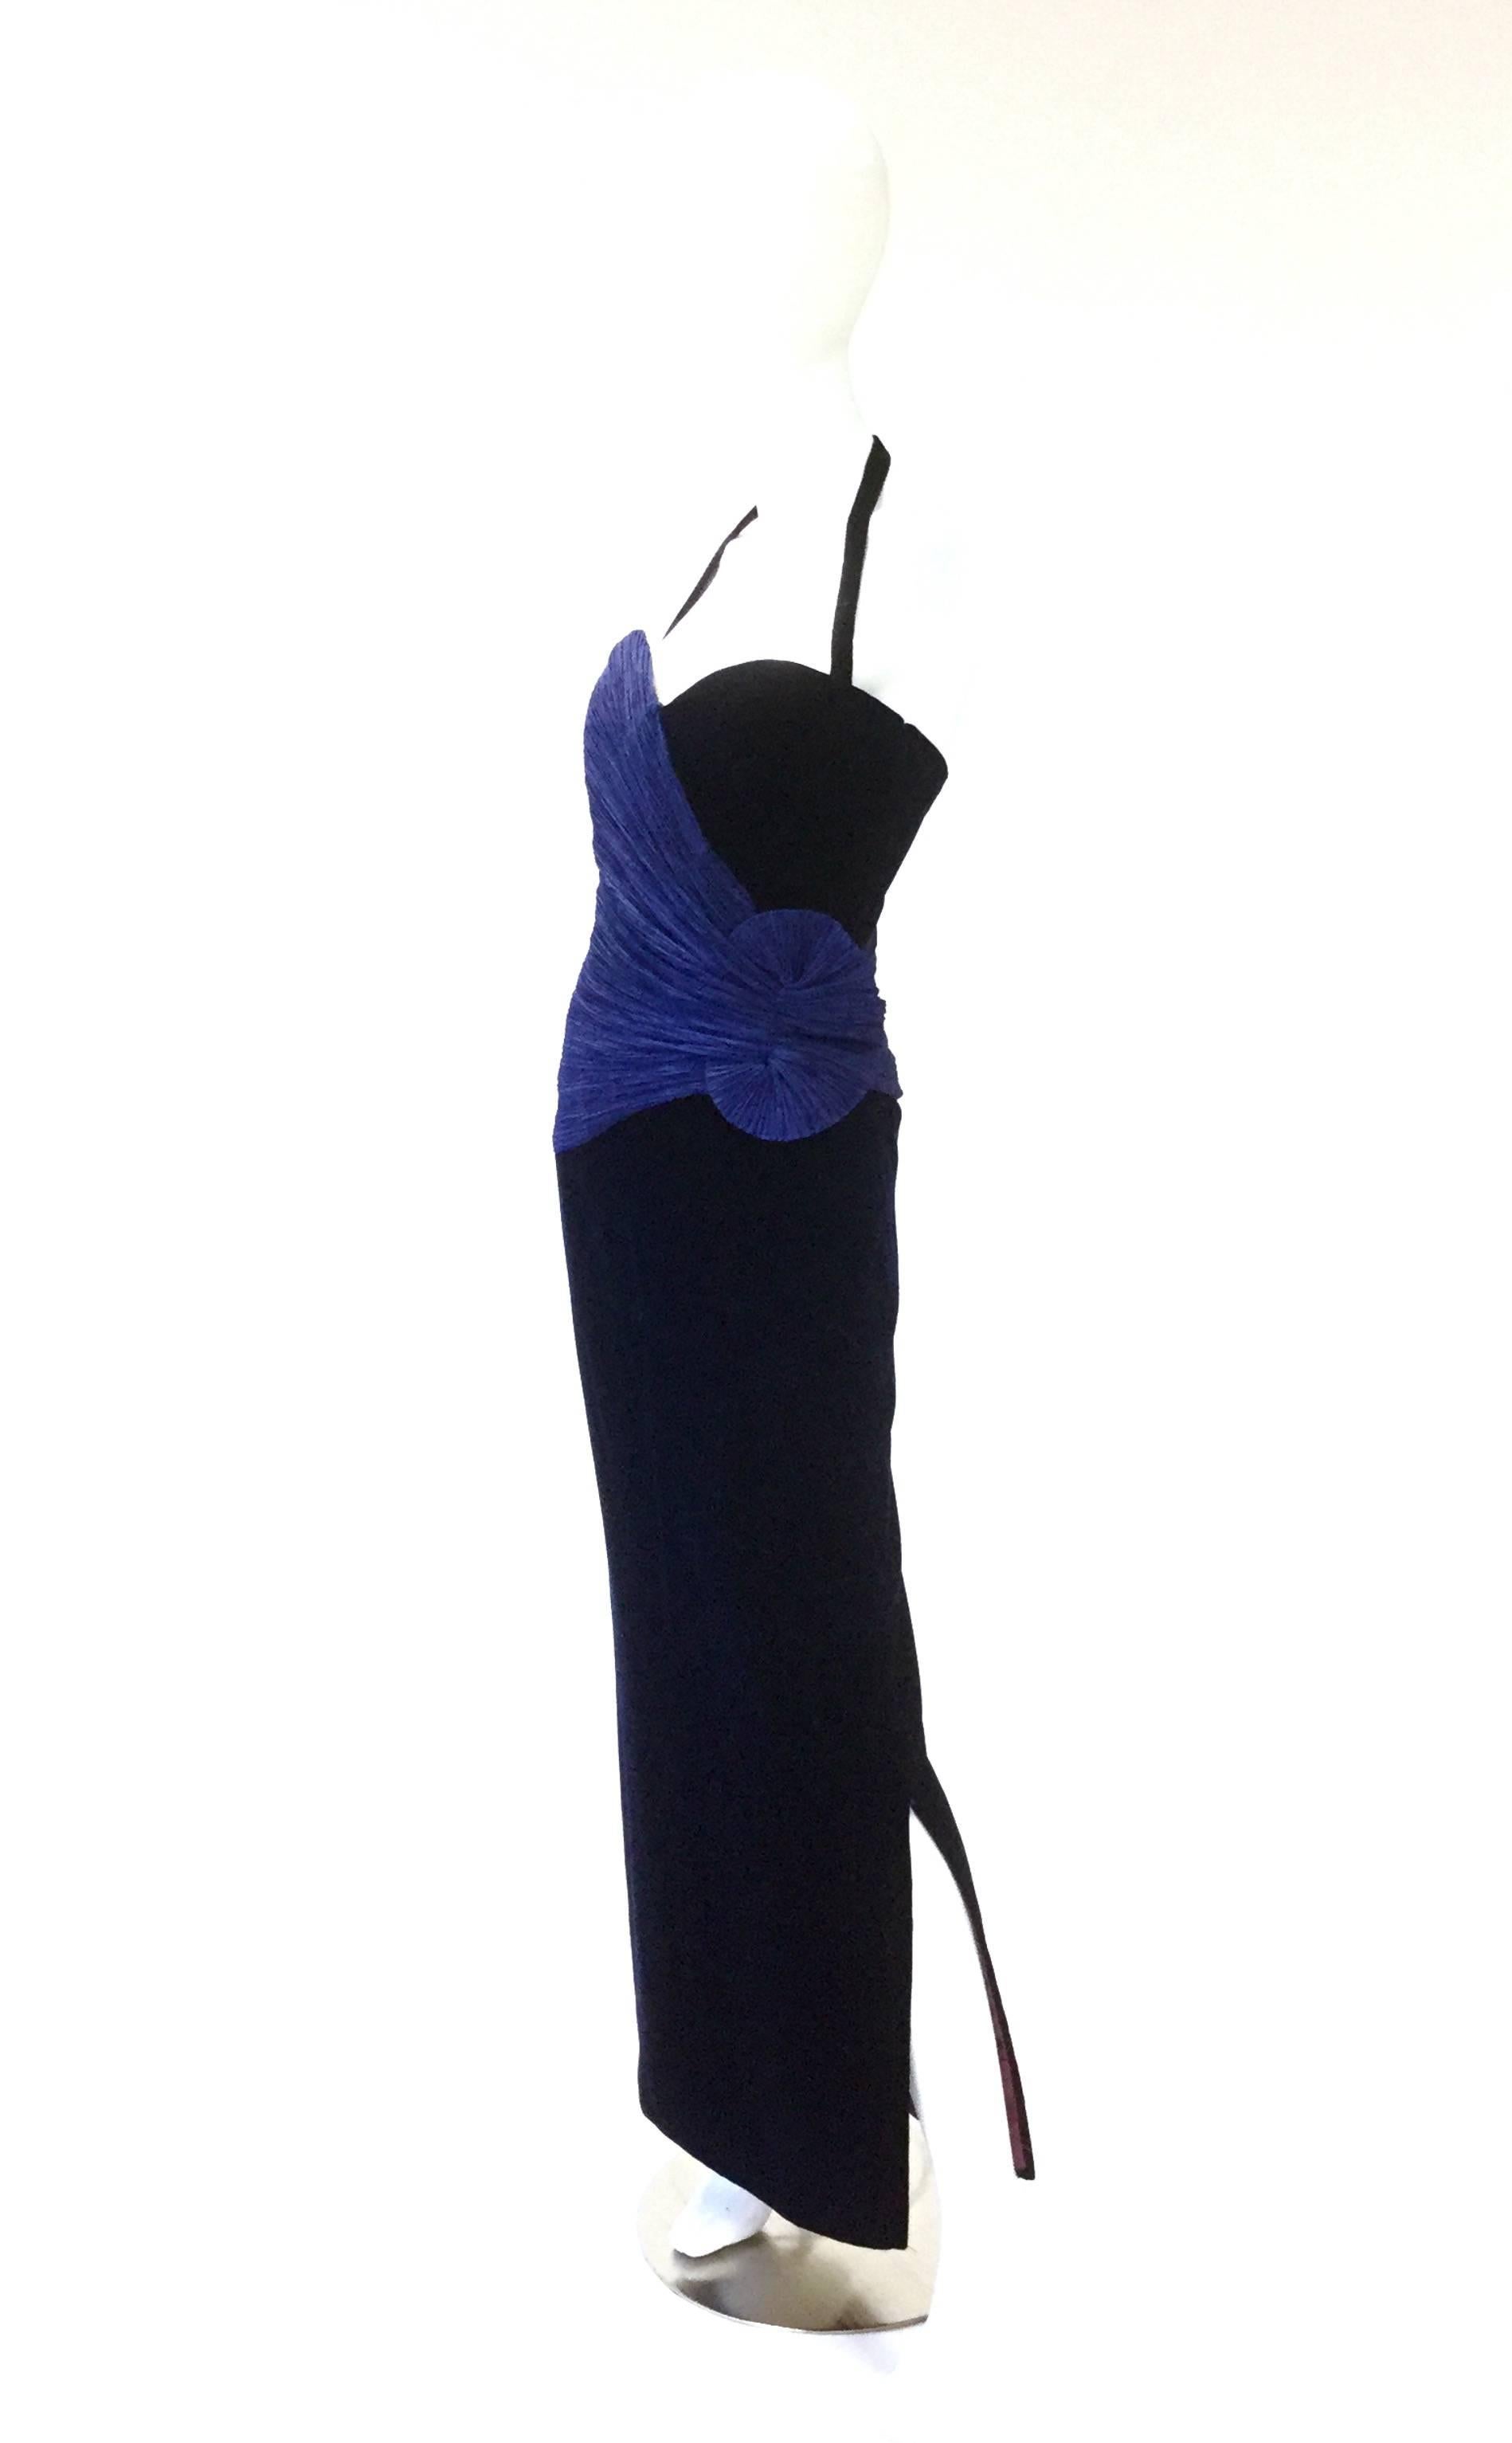 This fitted indigo taffeta and black velvet dress has a sweetheart neckline with optional halter top straps, and is ankle length. The velvet dress has more than a passing similarity to another of Murray Arbeid's designs - the 1987 red and black